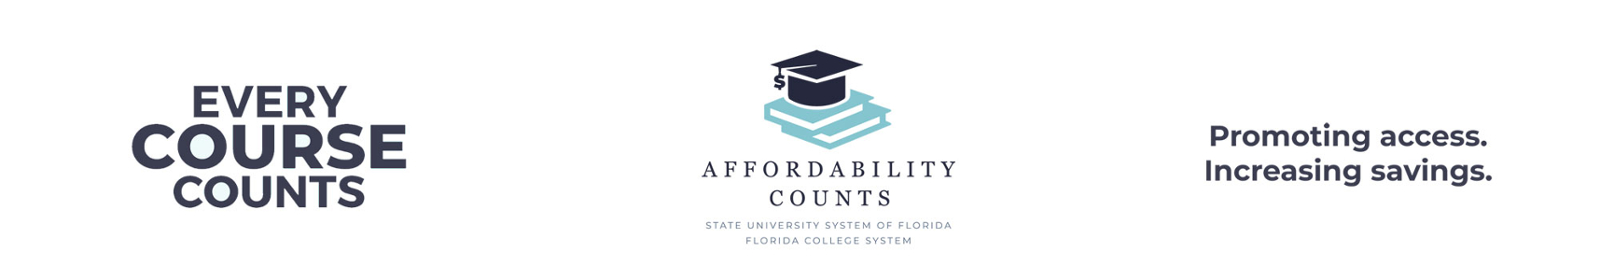 every course counts. promoting access. increasing savings and affordability counts logo